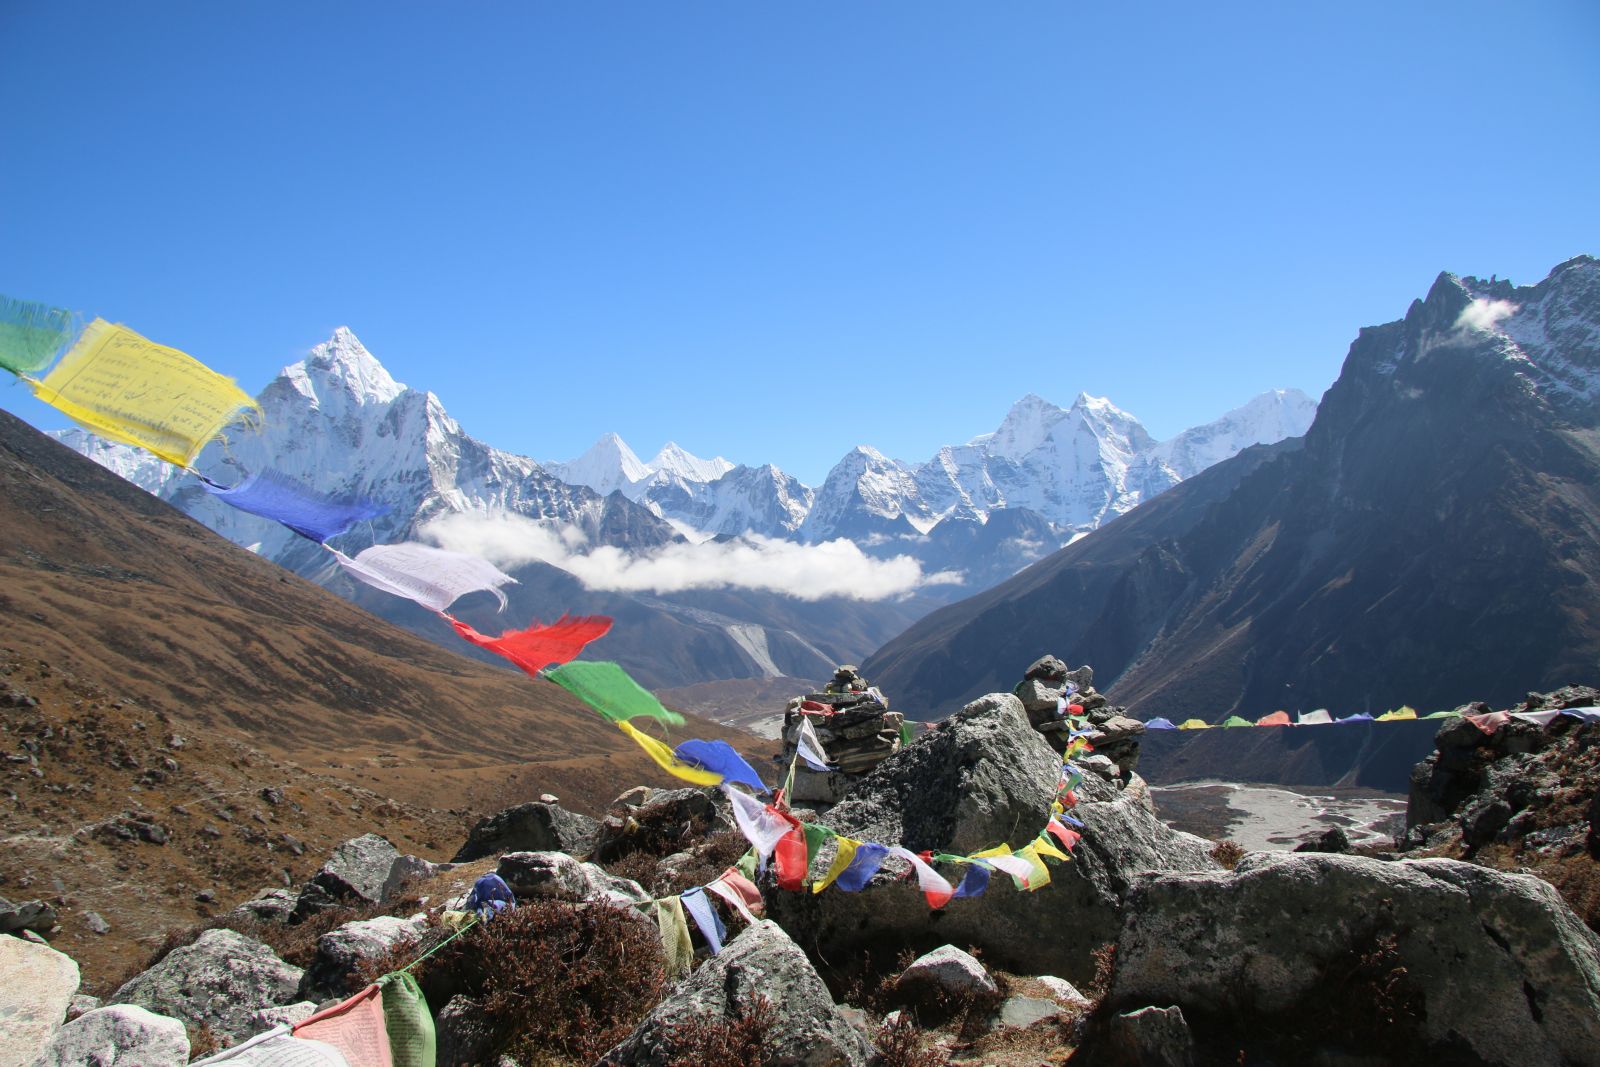 One of the amazing wonders of Everest - Views of the mountains